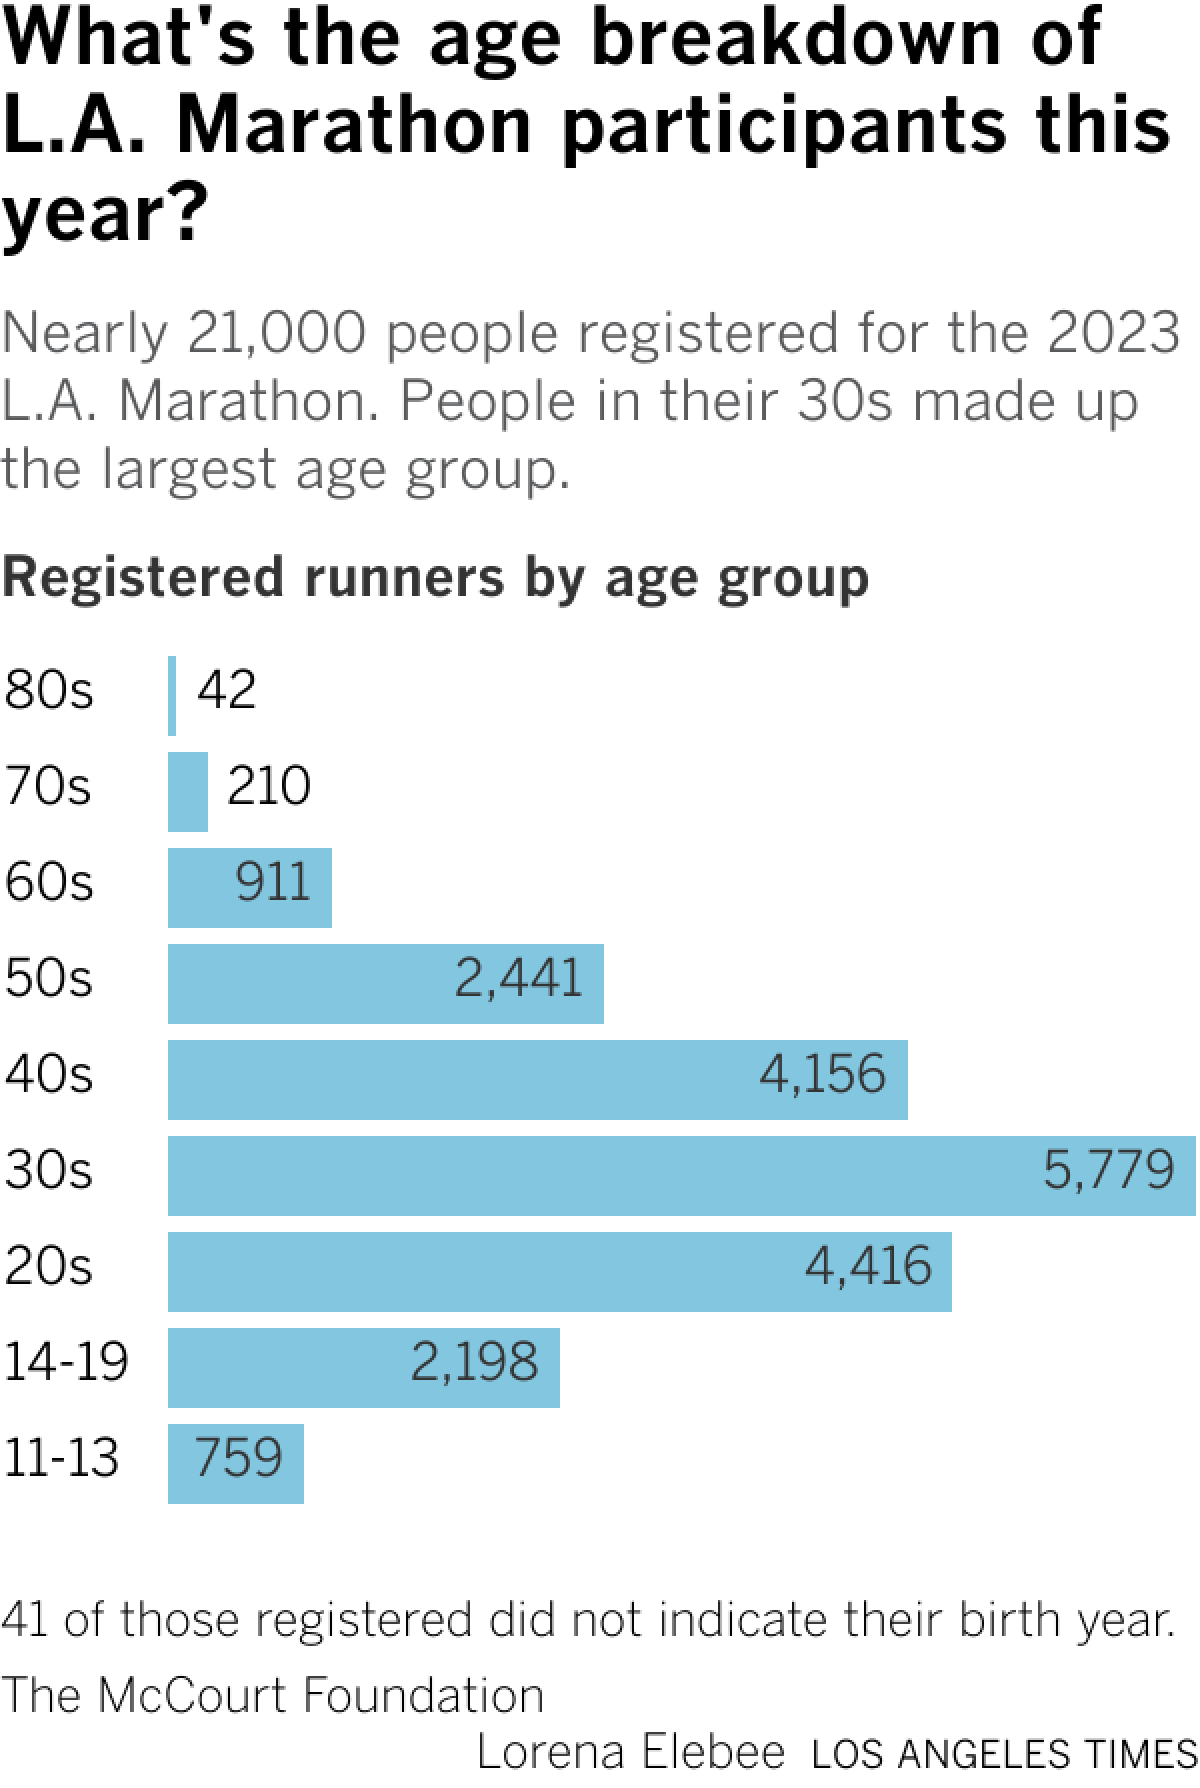 Nearly 21,000 people registered for the 2023 L.A. Marathon. People in their 30s made up the largest age group.